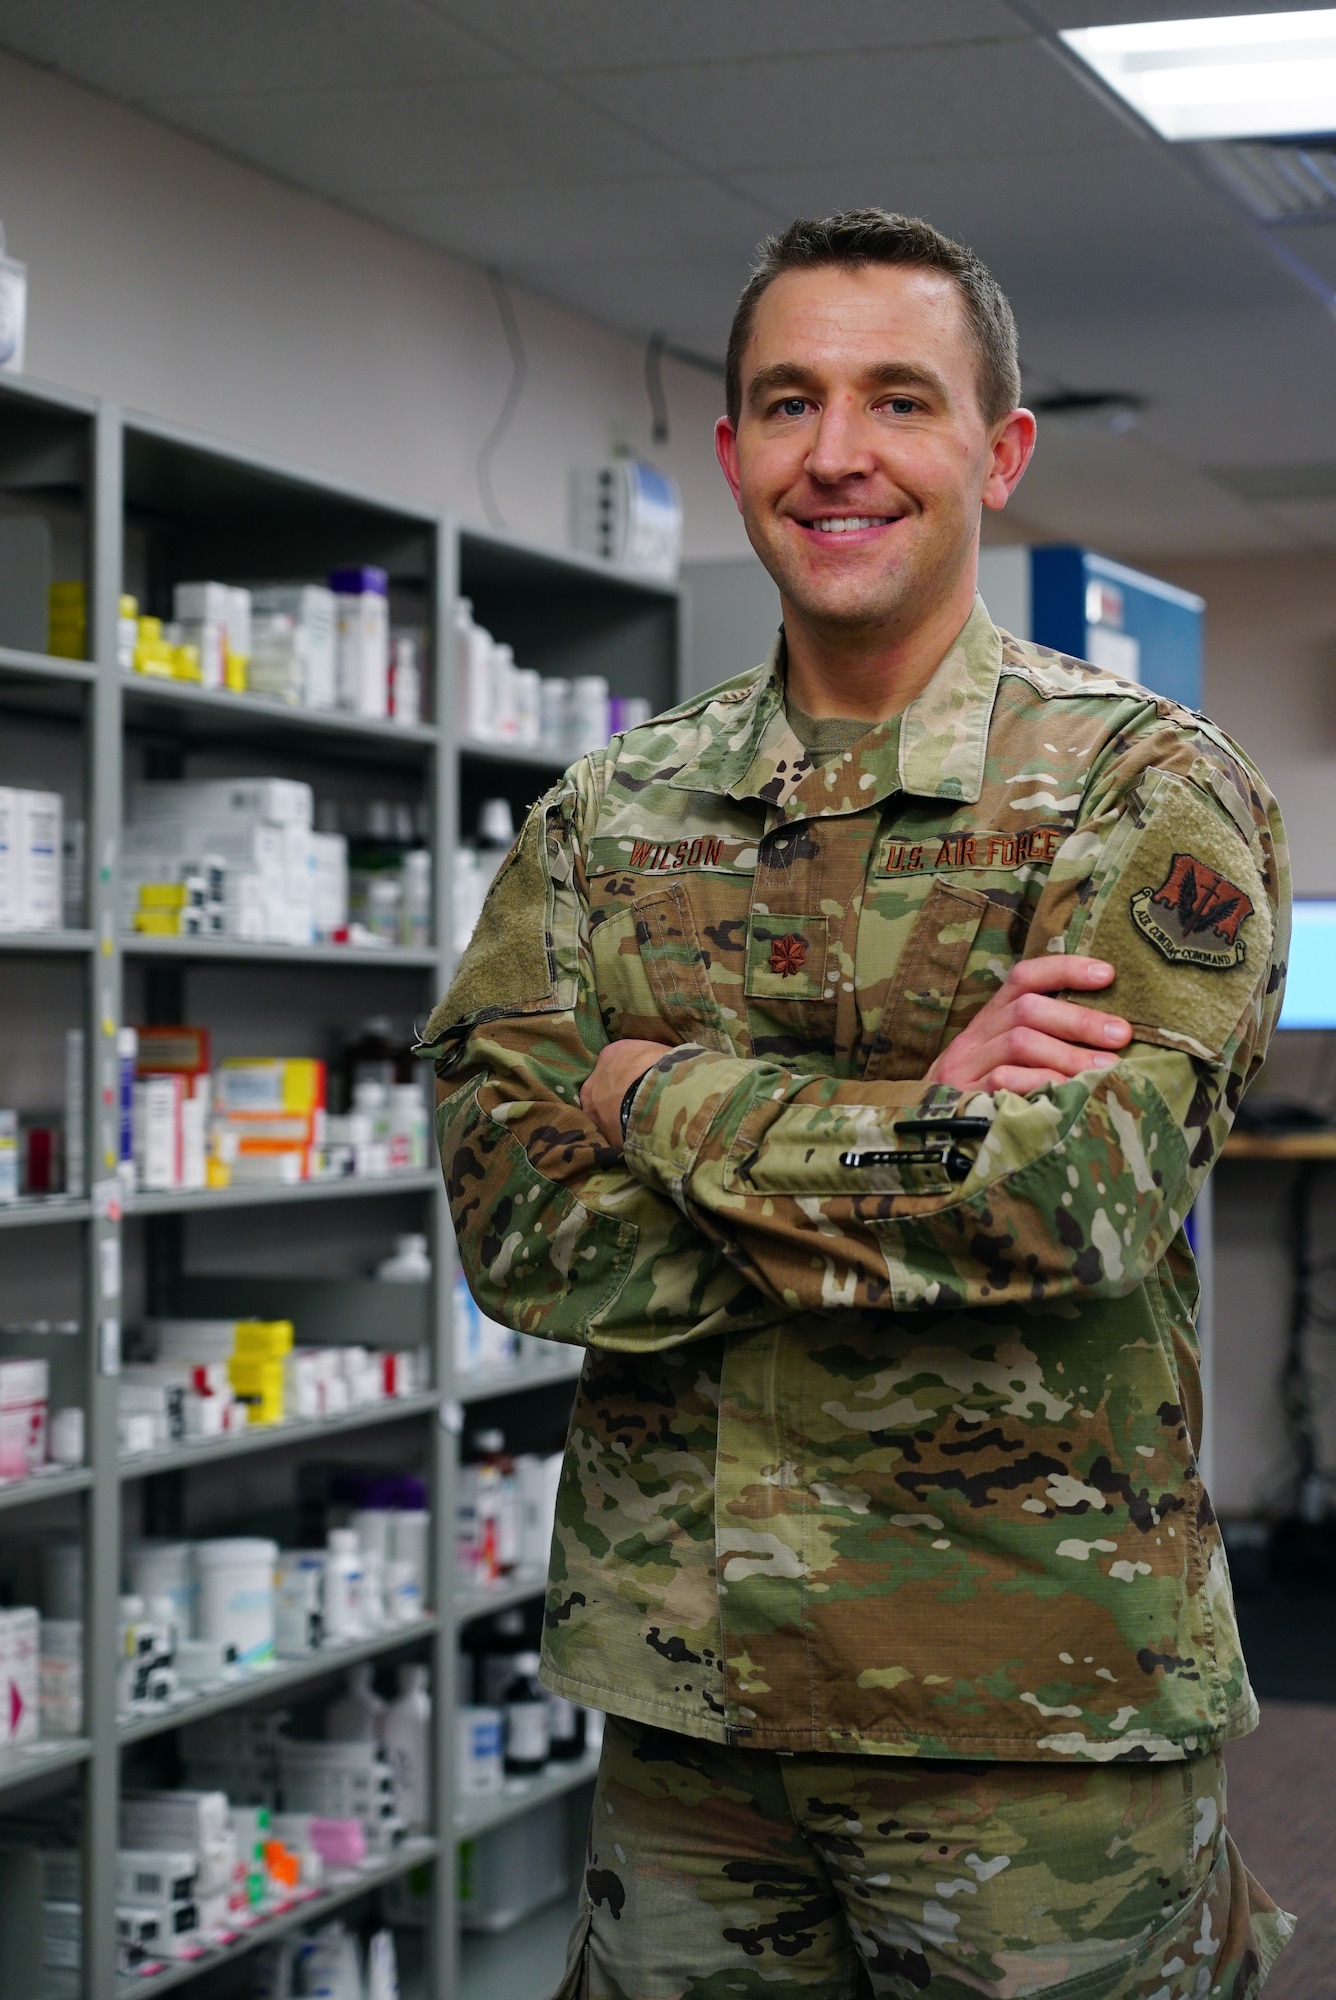 Maj. Burke Wilson, 319th Healthcare Operations Squadron diagnostics and therapeutics flight commander, stands  in the pharmacyat Grand Forks Air Force Base, N.D., Jan. 21, 2021. The pharmacy helps maintain mission readiness and makes sure Airmen and their families receive the proper medical treatment they require. (U.S. Air Force photo by Airman 1st Class Jack LeGrand)